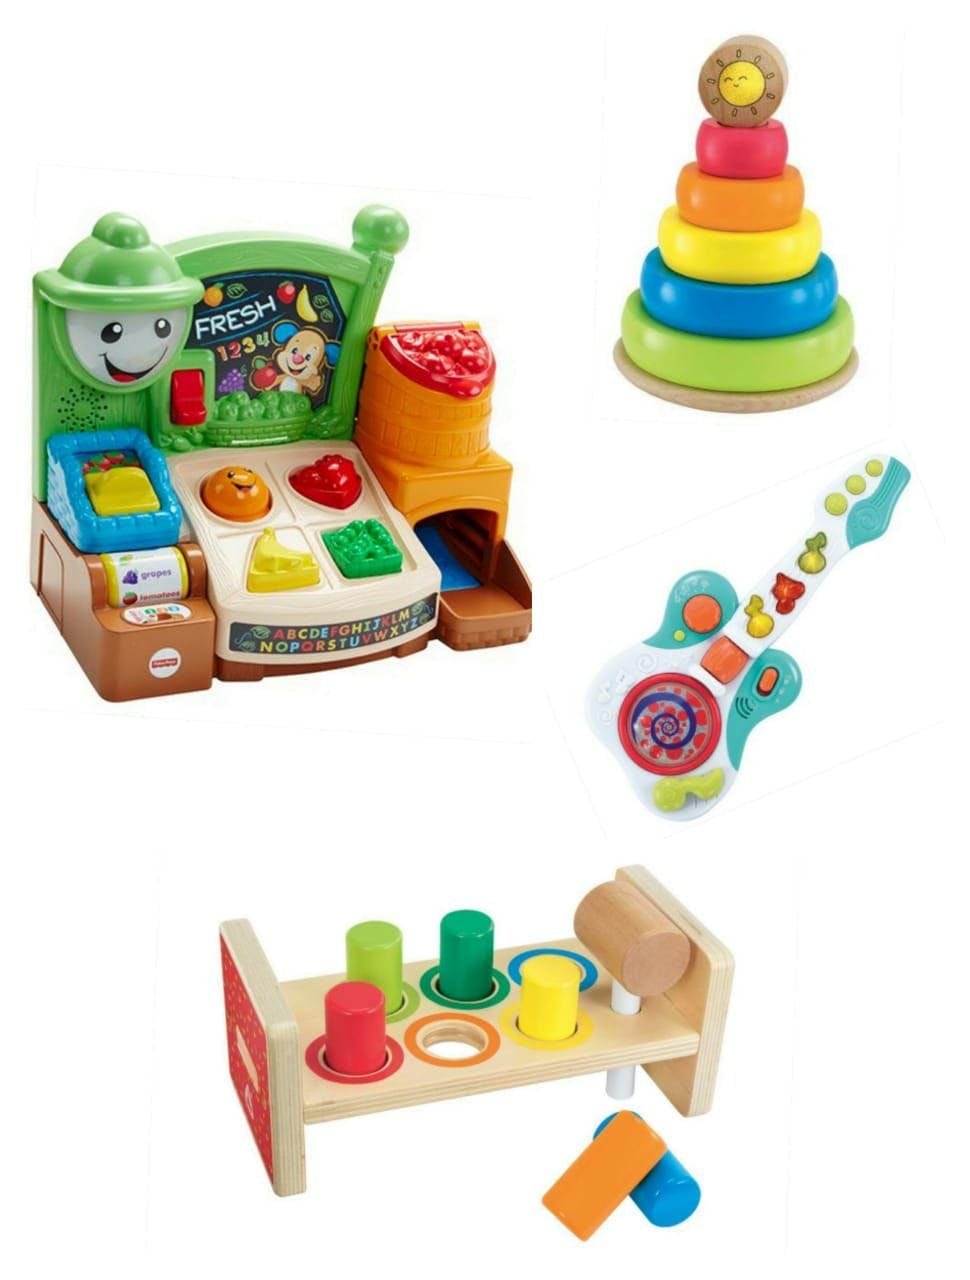 Image 17585 of Toys 20 : Fisher Price Laugh & Learn Fruits n Fun Learning Market, ELC Musical Melody Guitar, ELC Wooden Stacking Rings, & ELC Wooden Hammer Bench